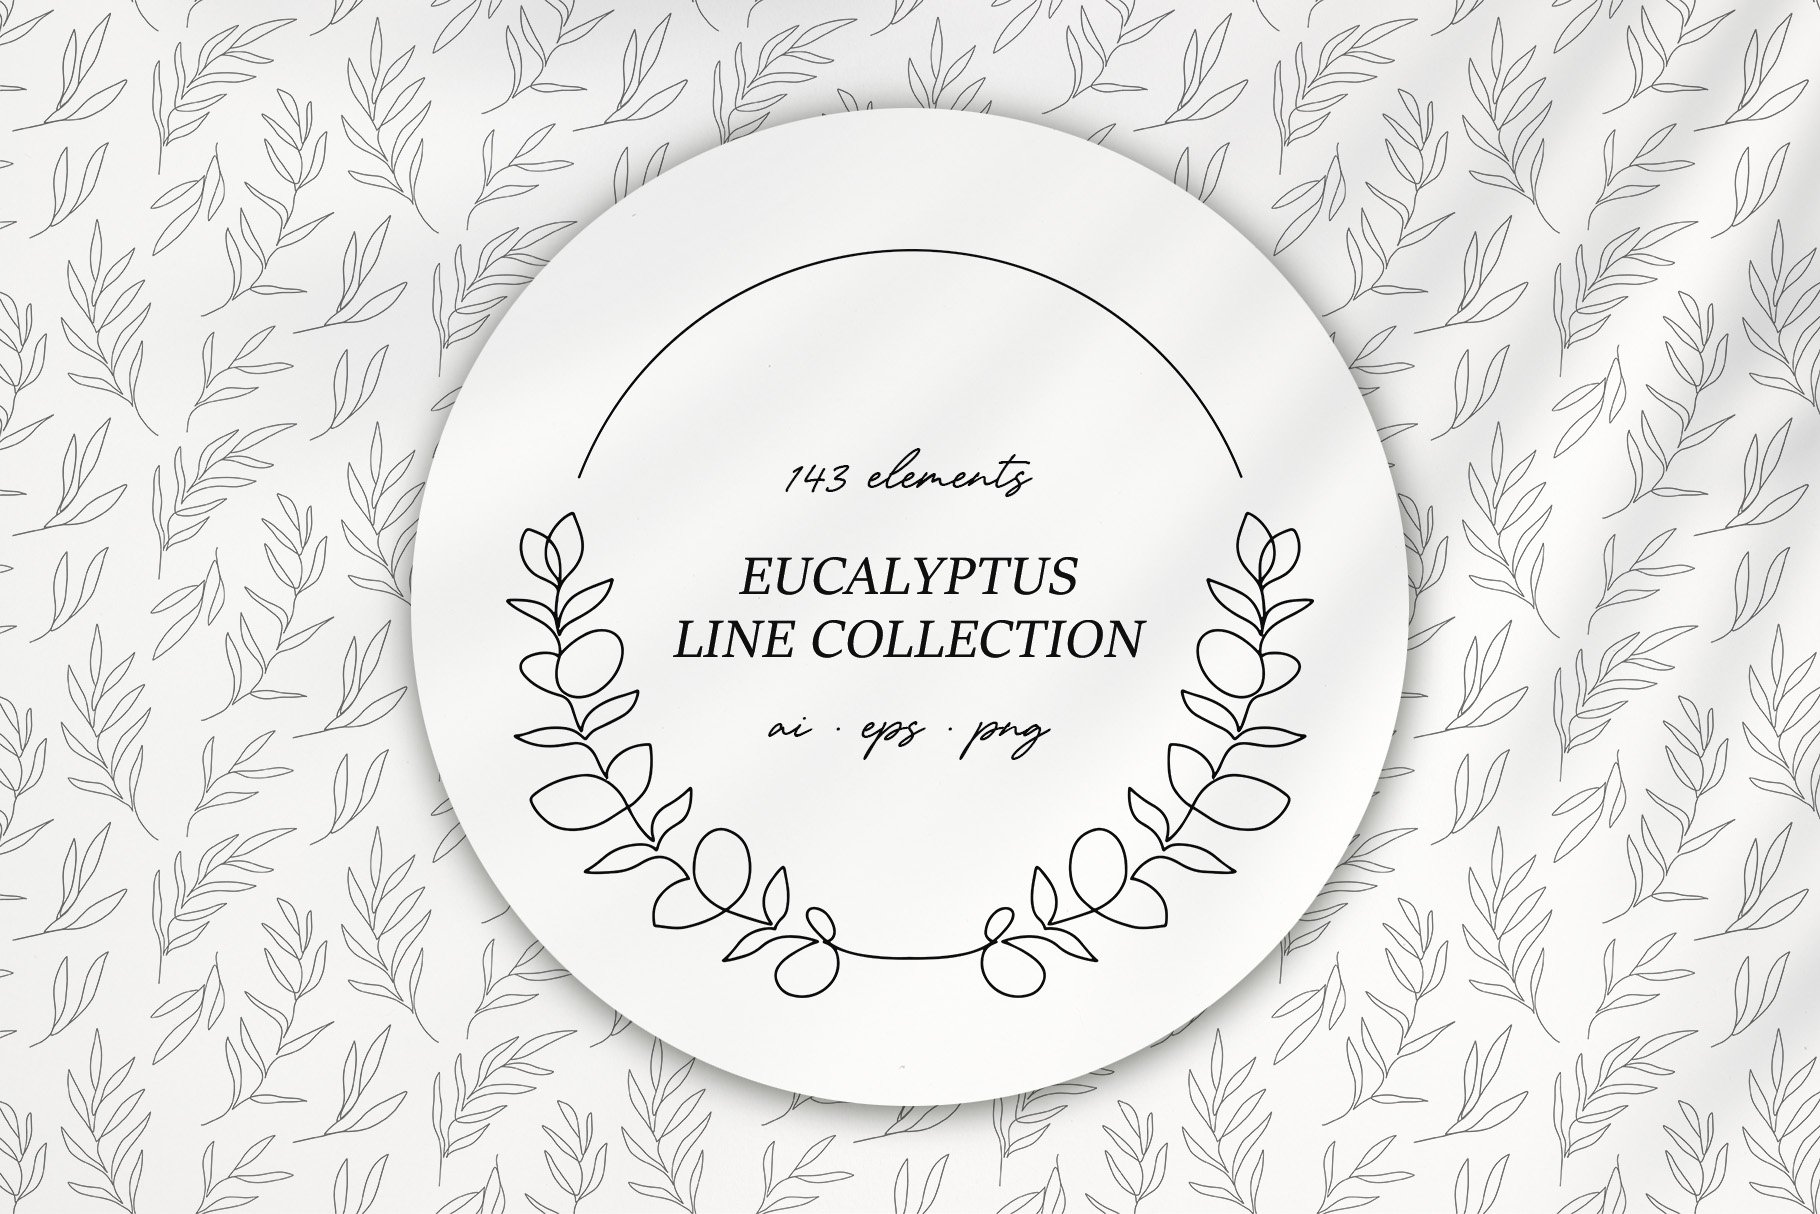 Eucalyptus line collection cover image.